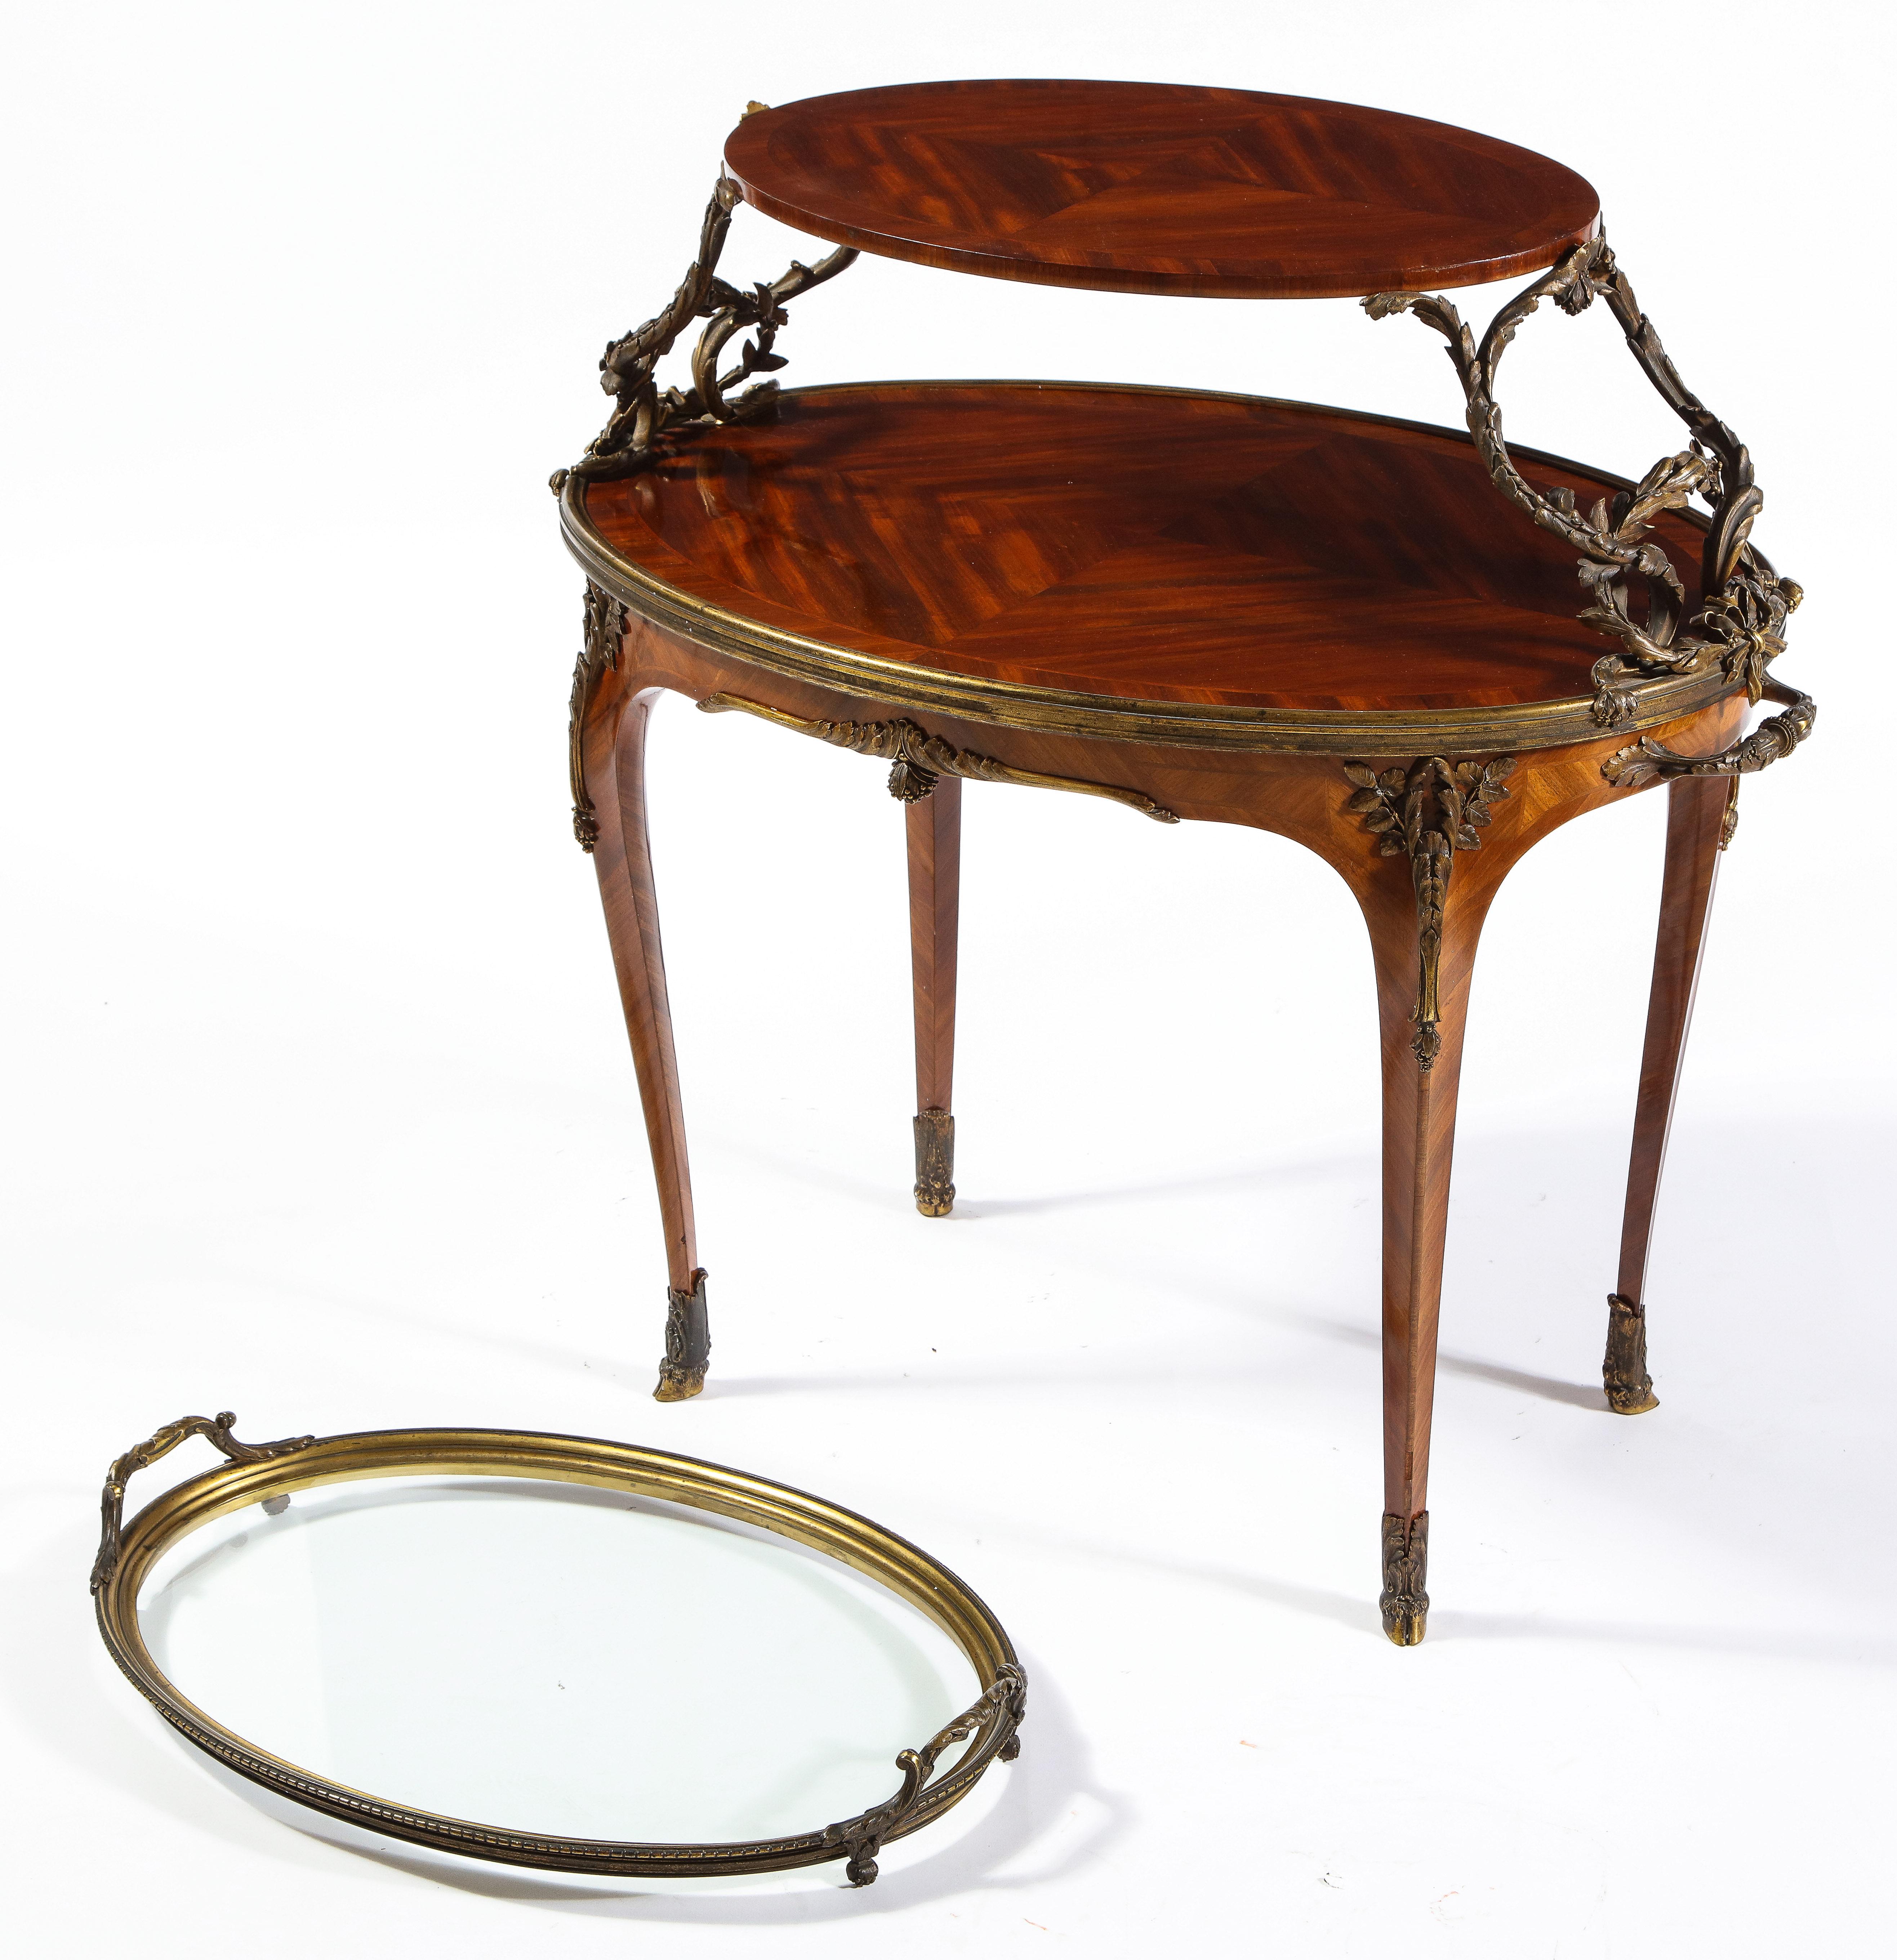 Hand-Carved French Ormolu-Mounted Mahogany Two-Tier Tea Table, Attributed to Paul Sormani For Sale